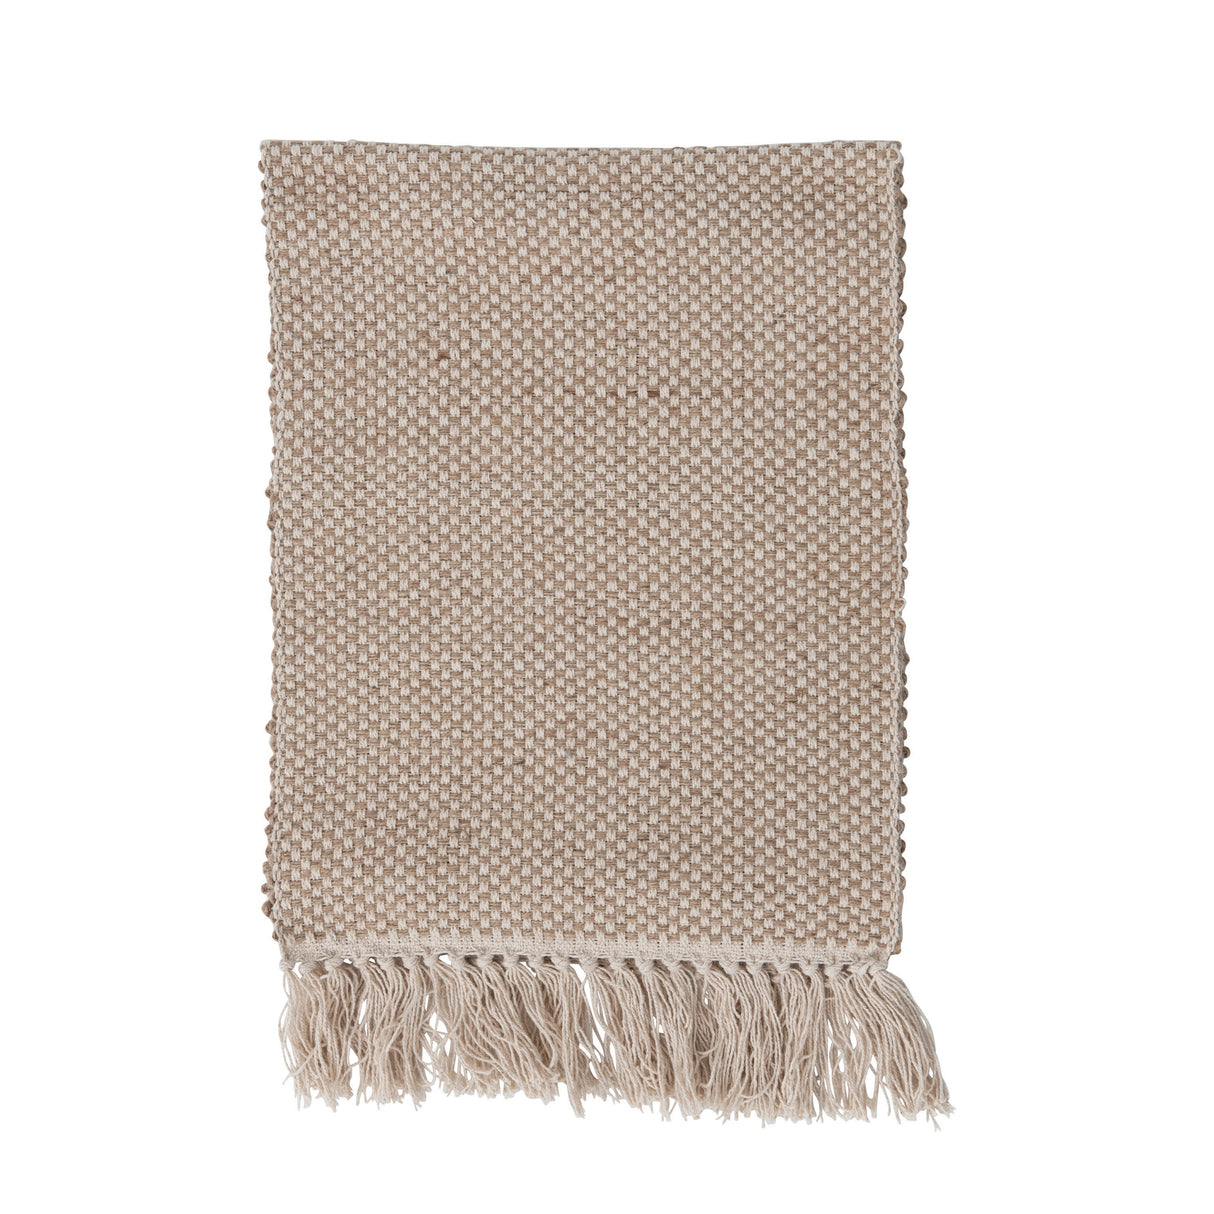 Woven Jute and Cotton Table Runner with Fringe